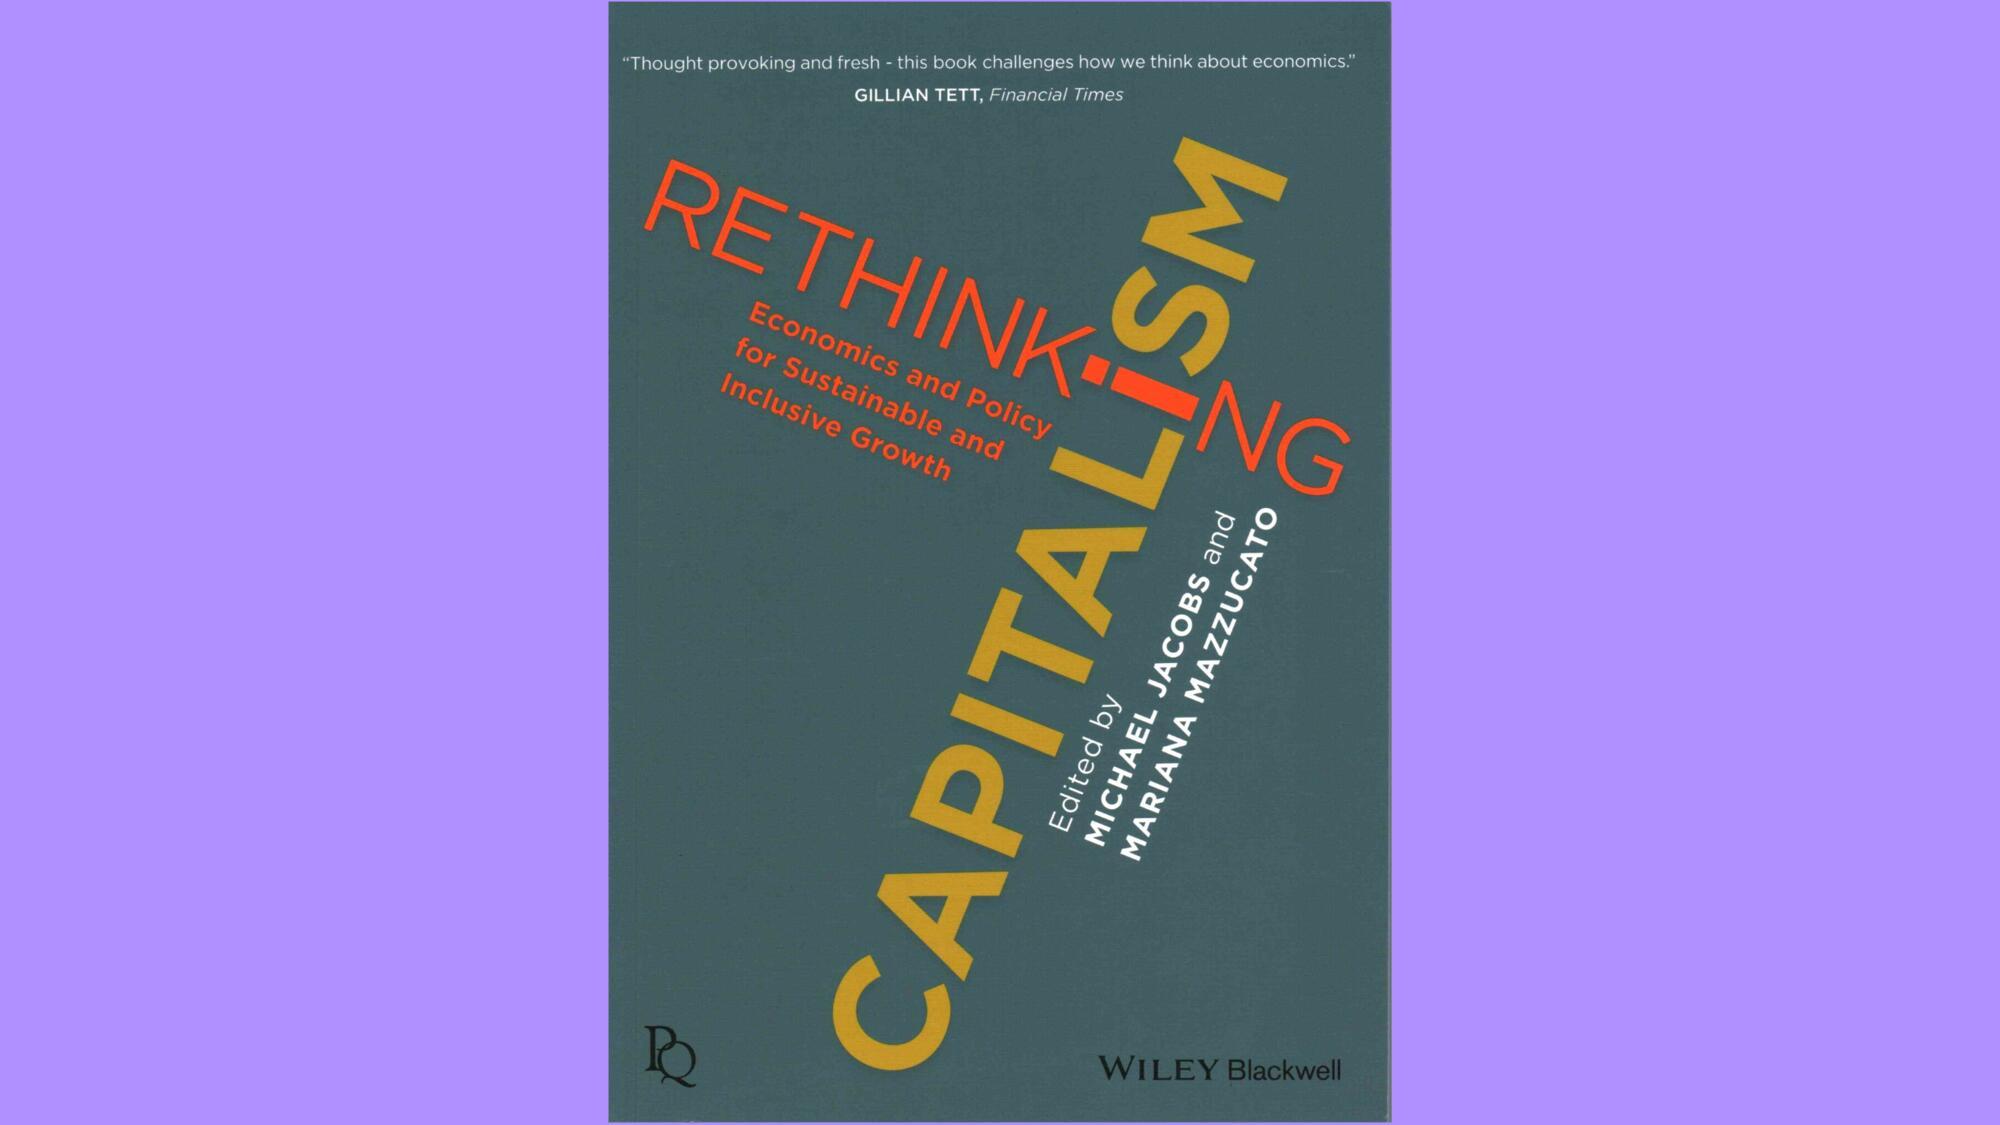 Book jacket for Rethinking Capitalism by Michael Jacobs and Mariana Mazzucato (eds.)